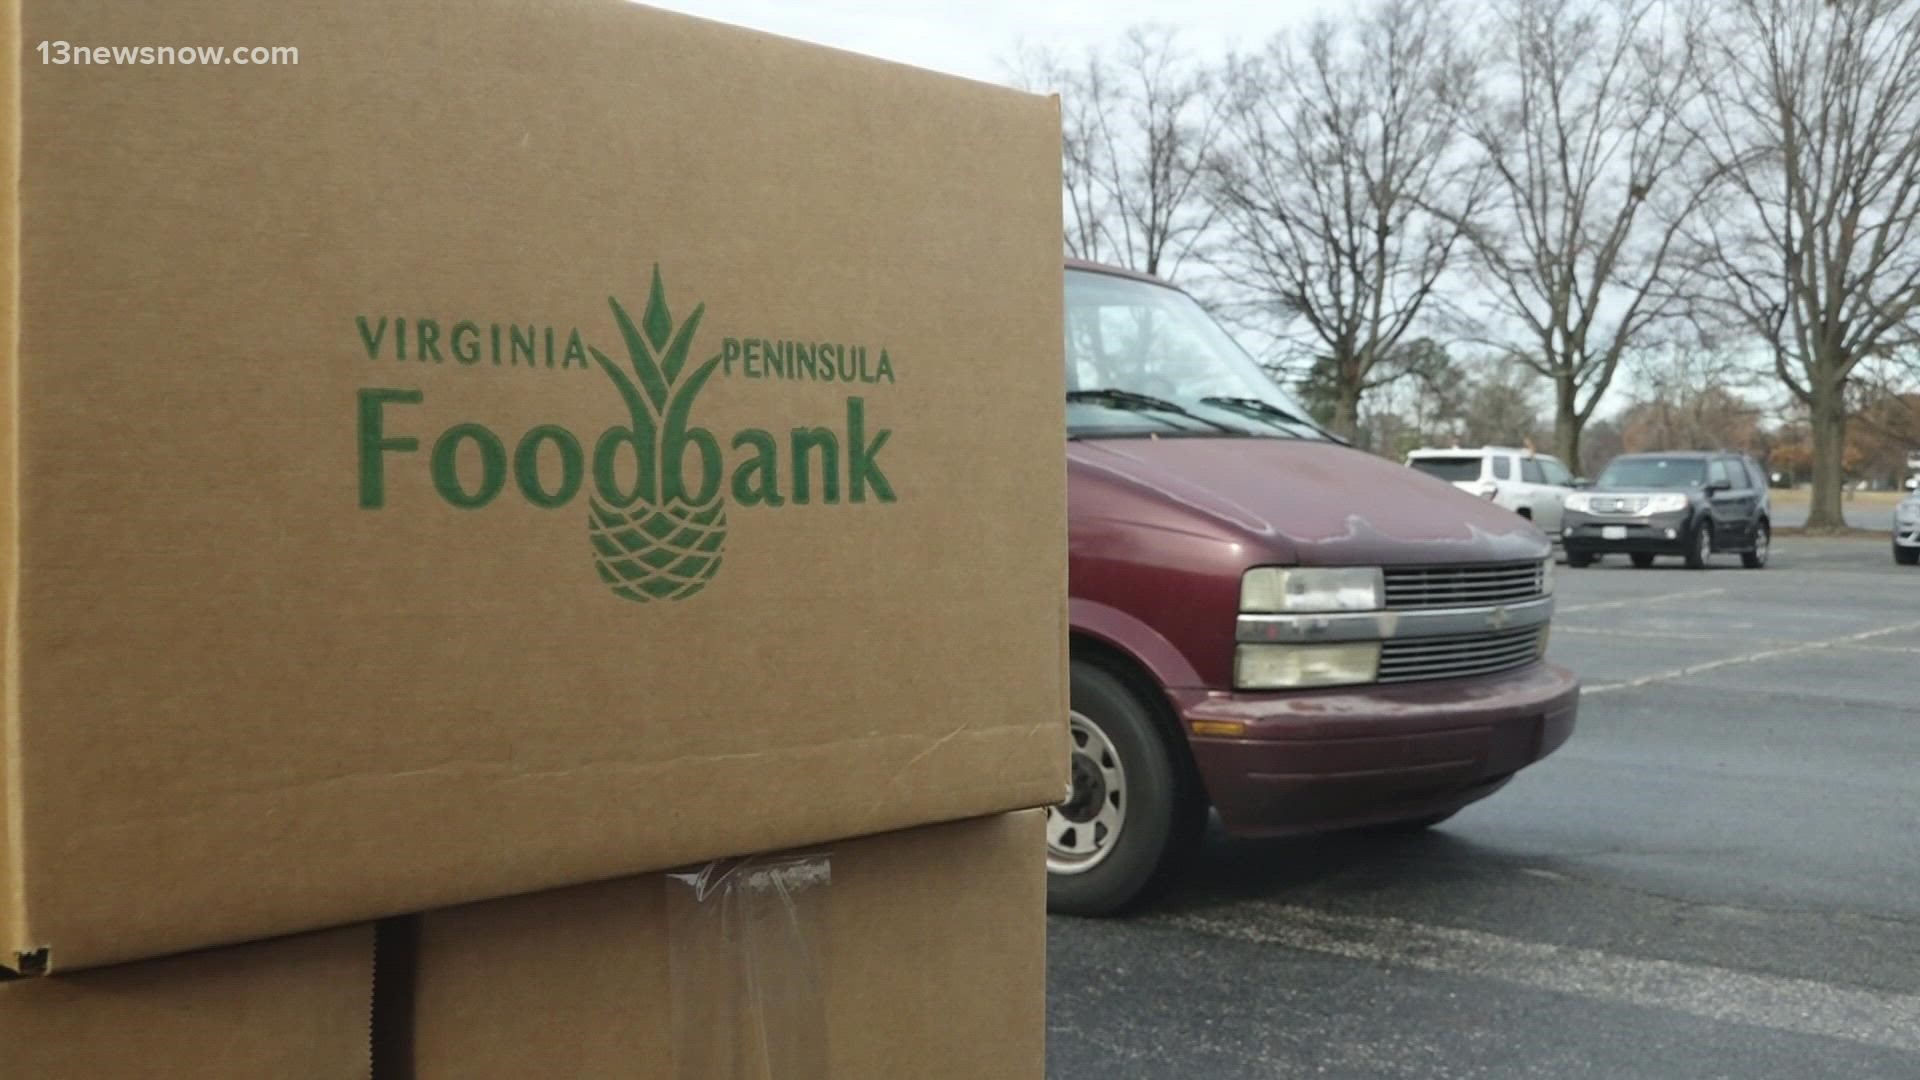 Joyner said the Foodbank served about 400 households at Wednesday's mobile food pantry when they expected about 350 households.